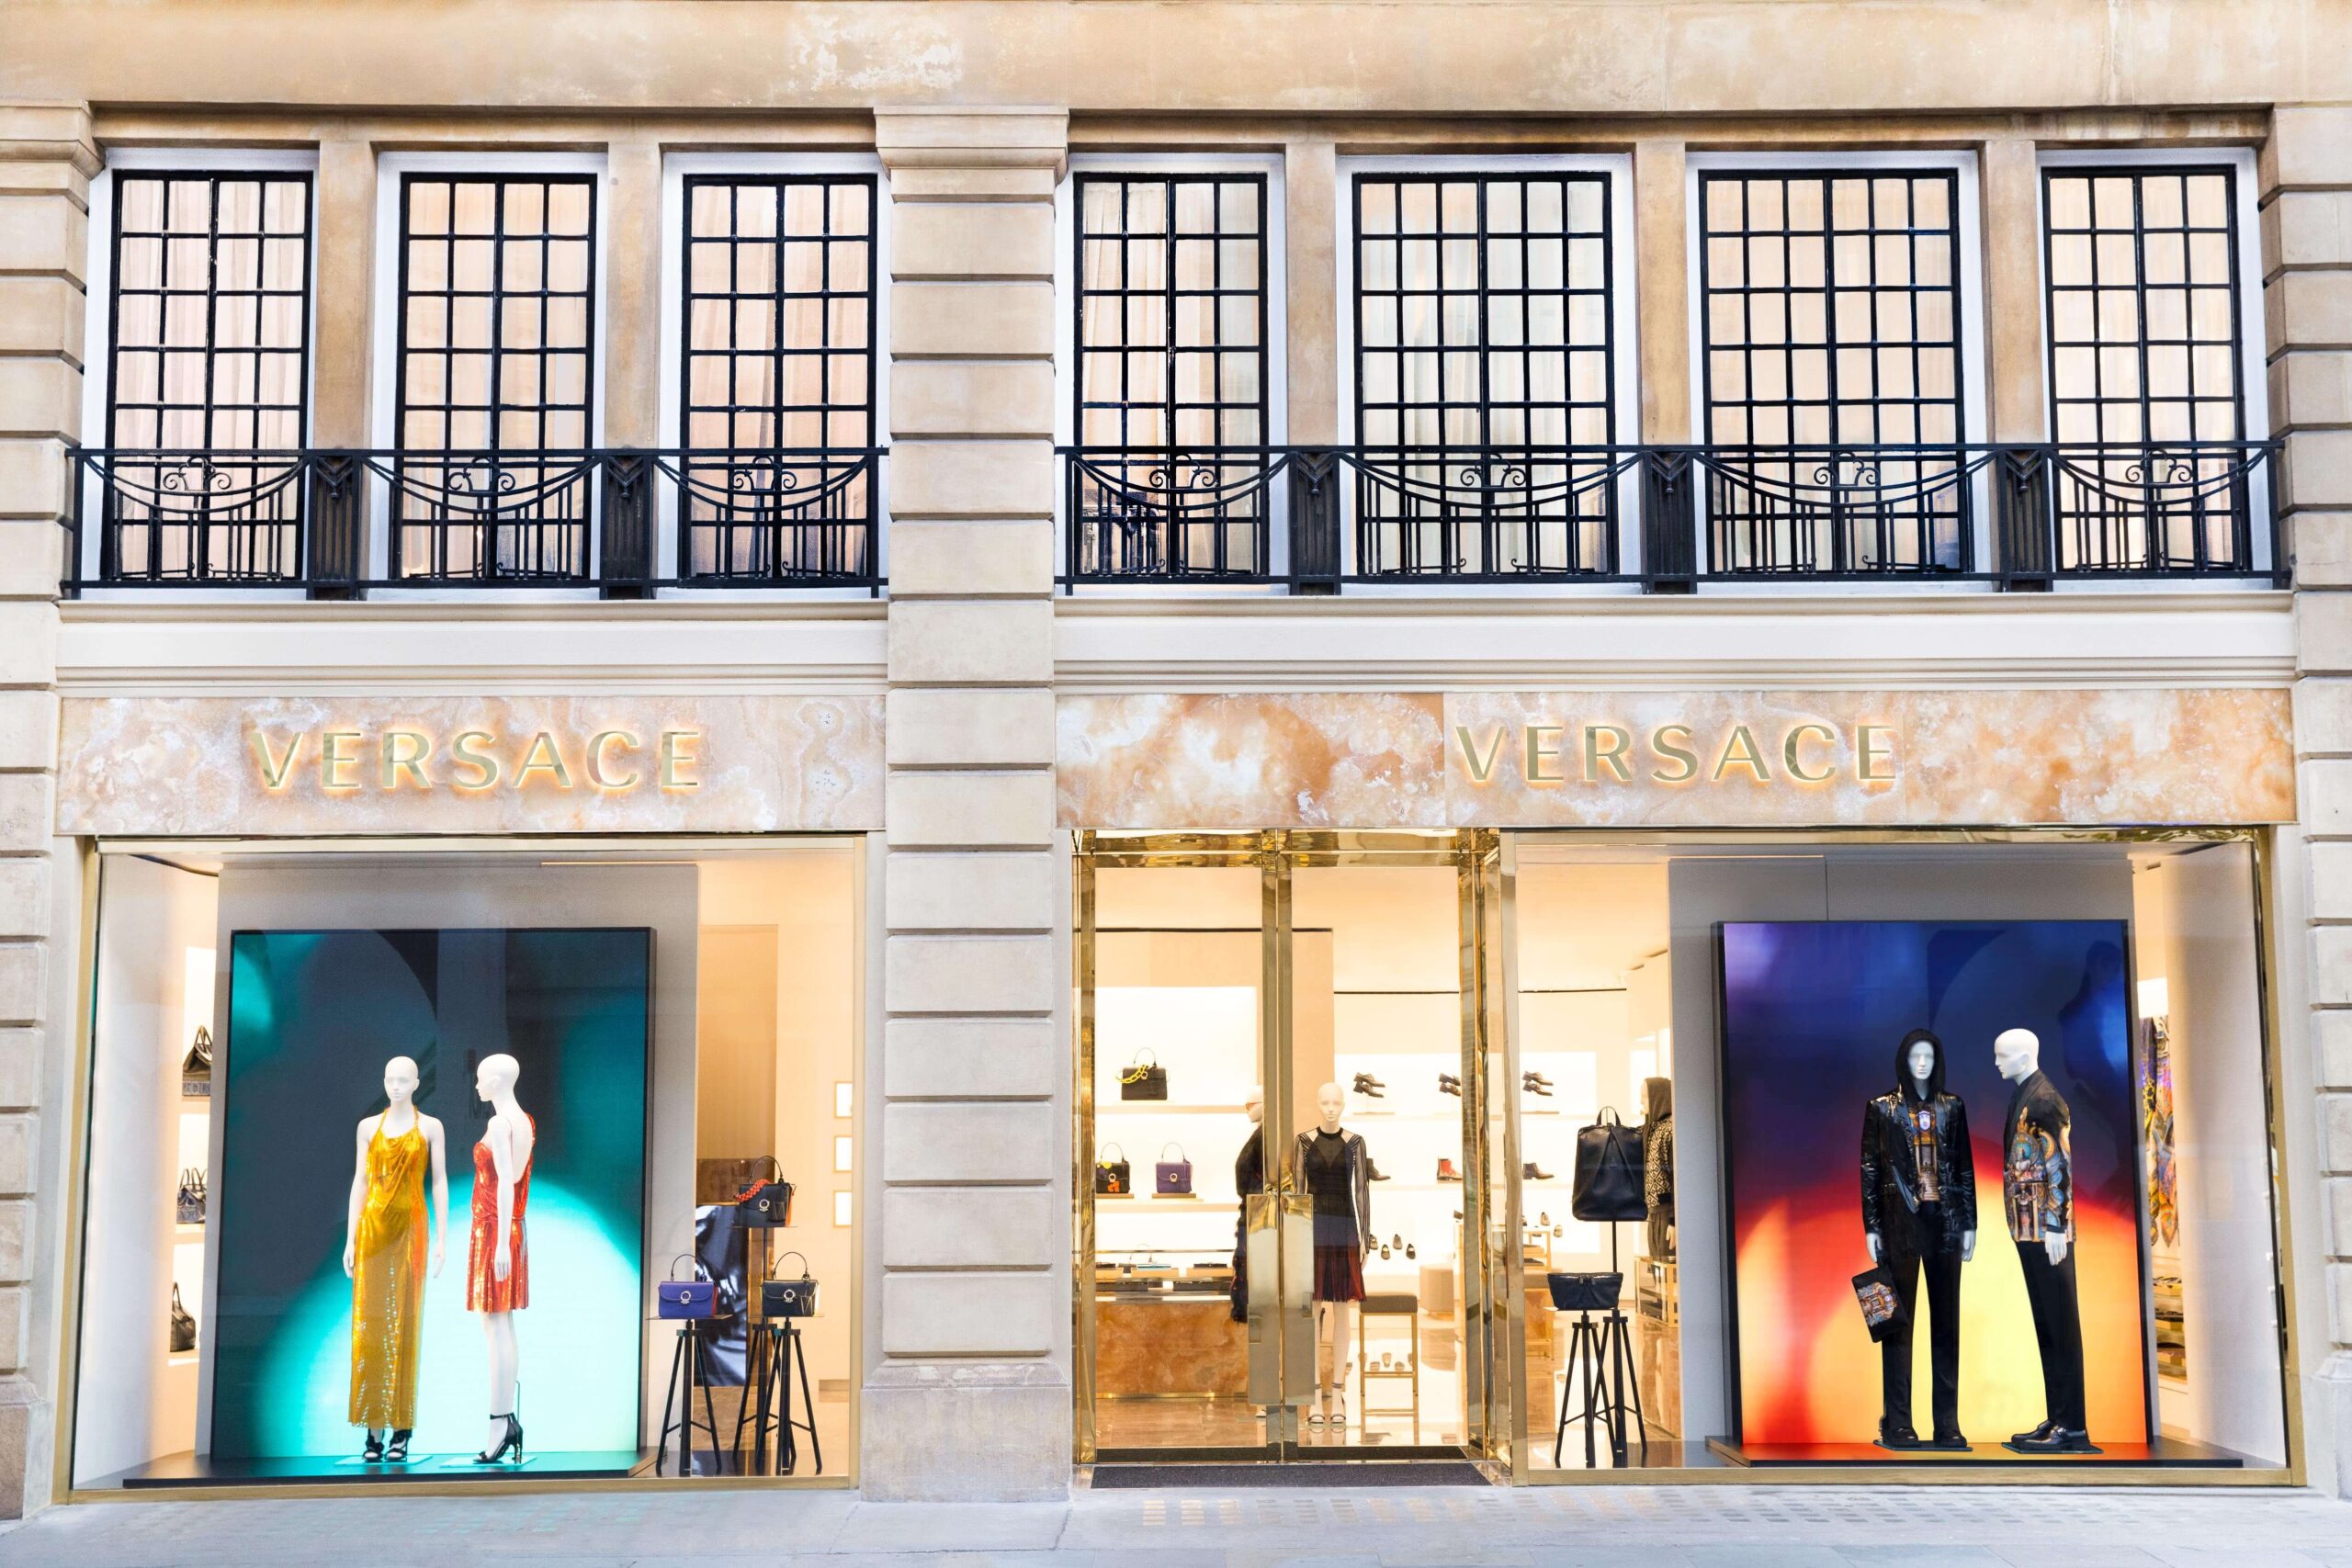 Louis Vuitton opens renovated store in Sloane Street, London - The